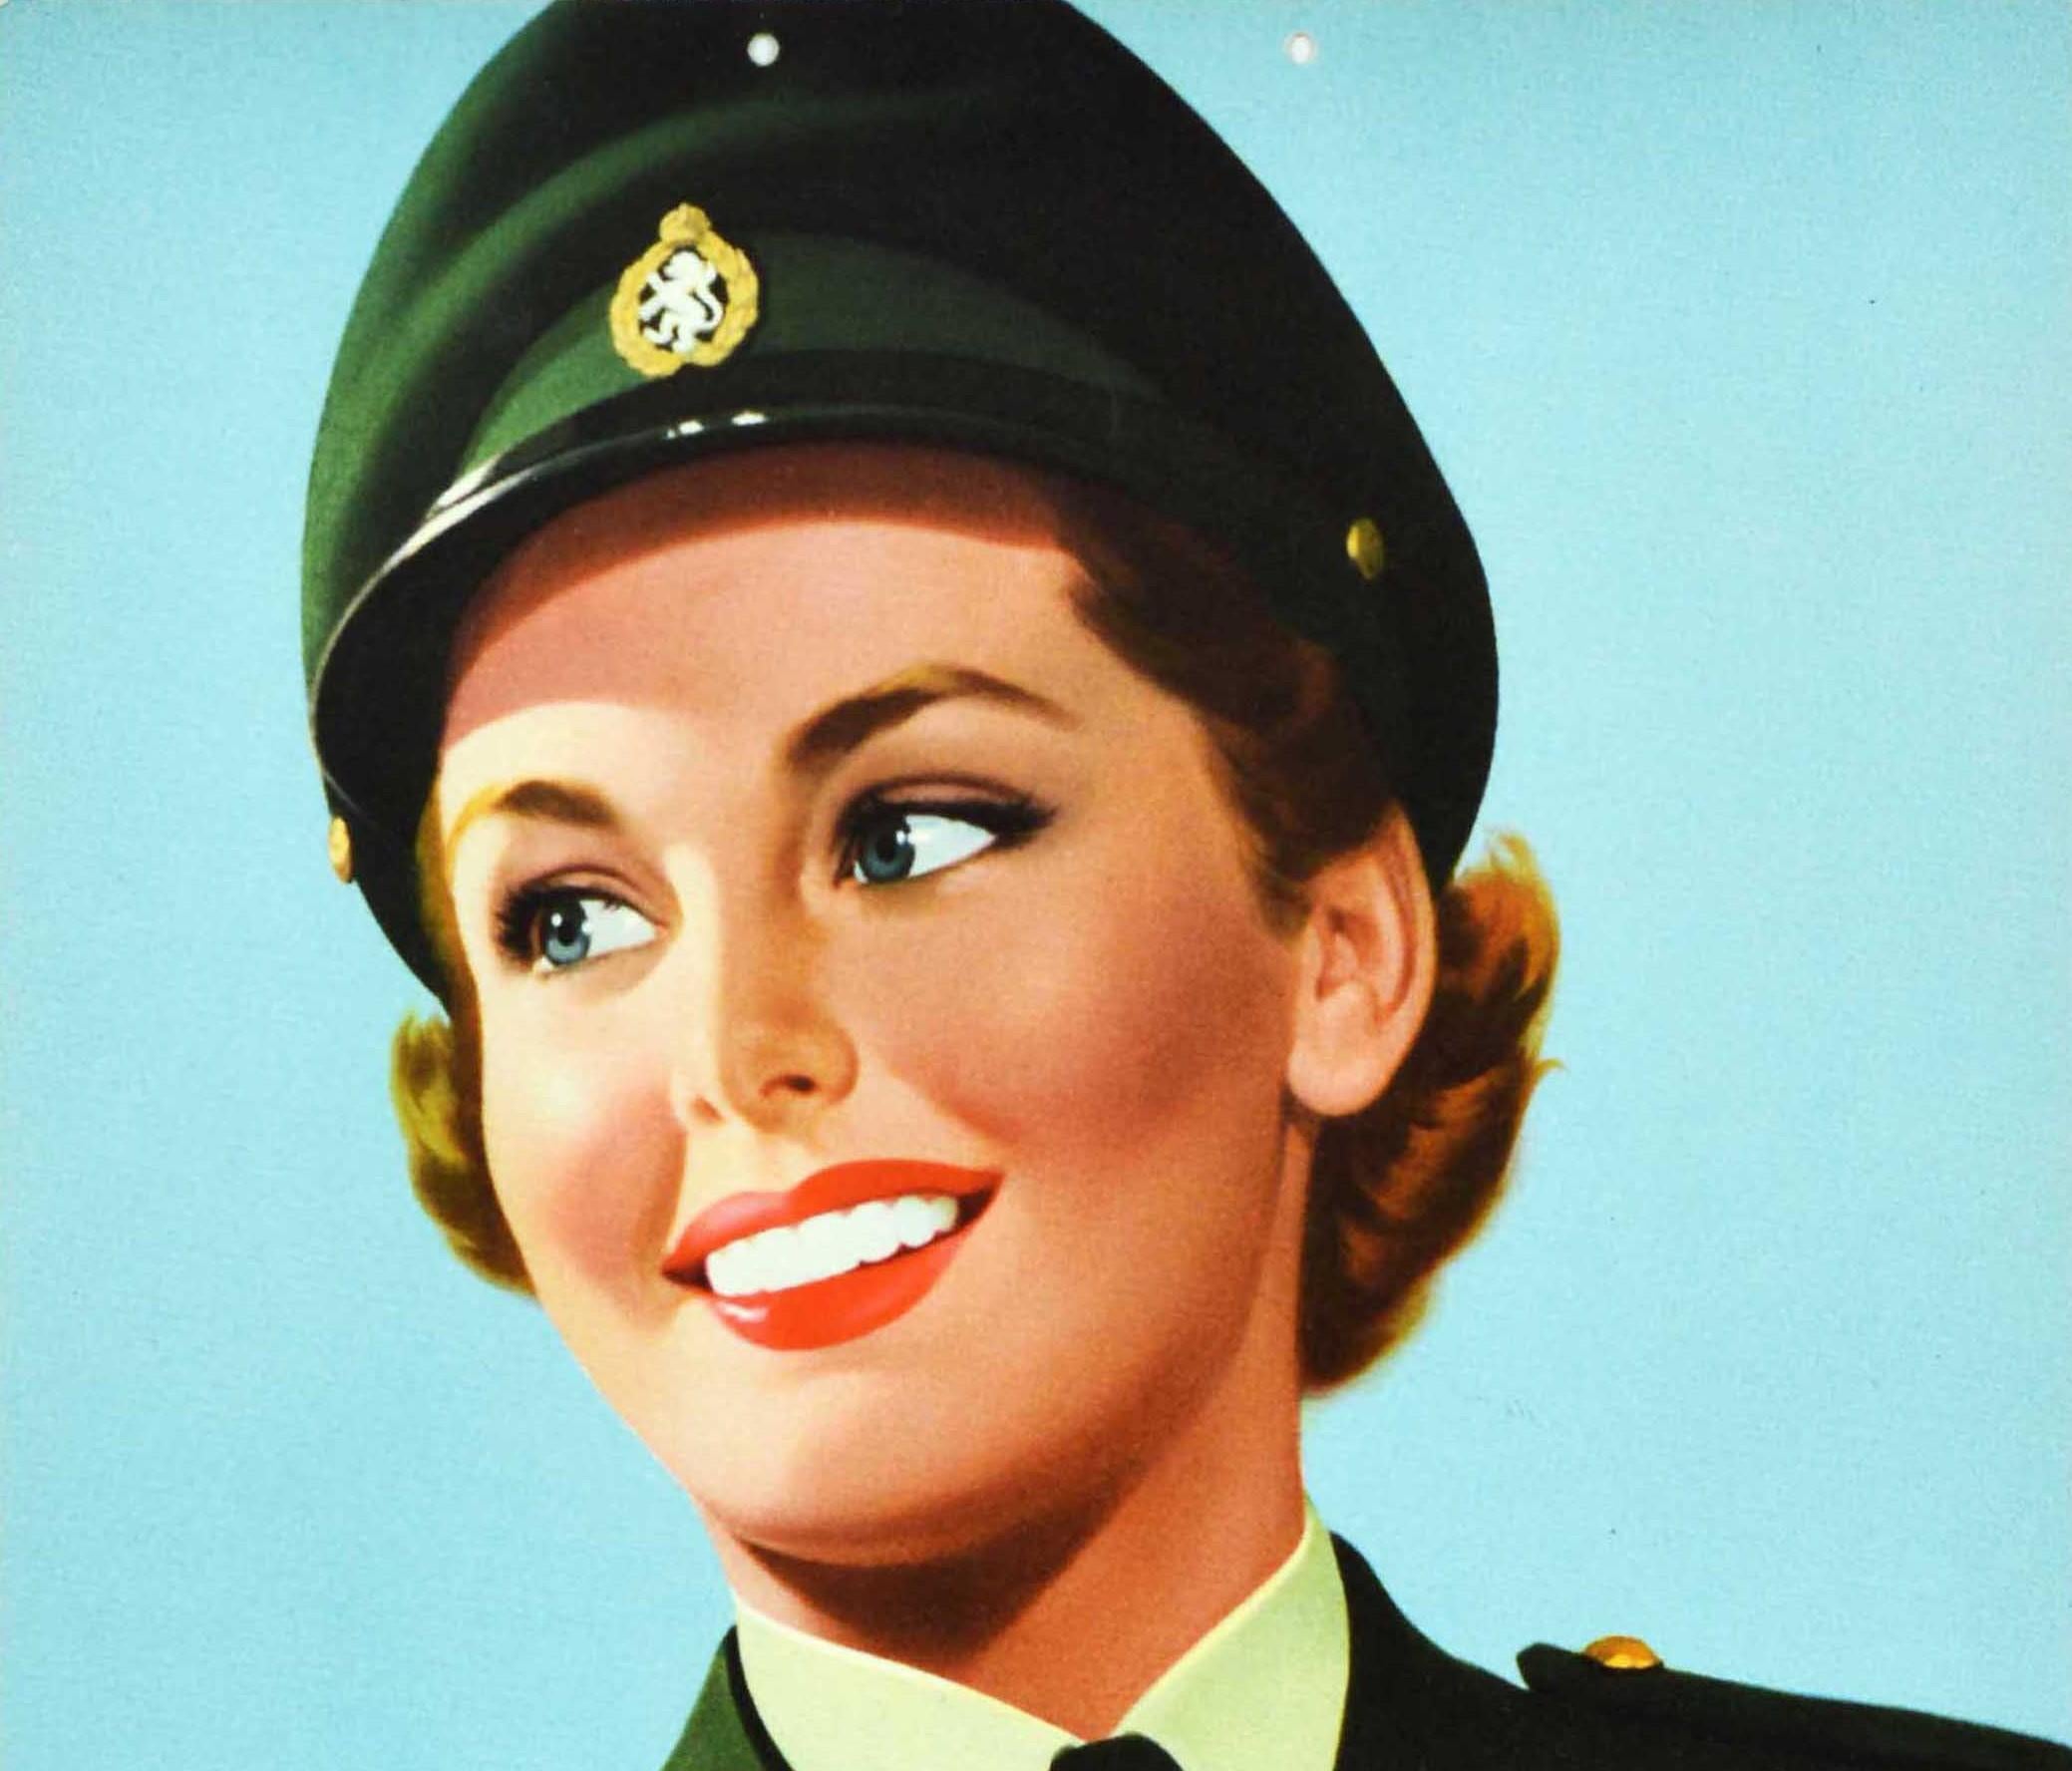 Original Vintage Military Poster WRAC A Fine Career Women's Royal Army Corps UK - Print by Unknown